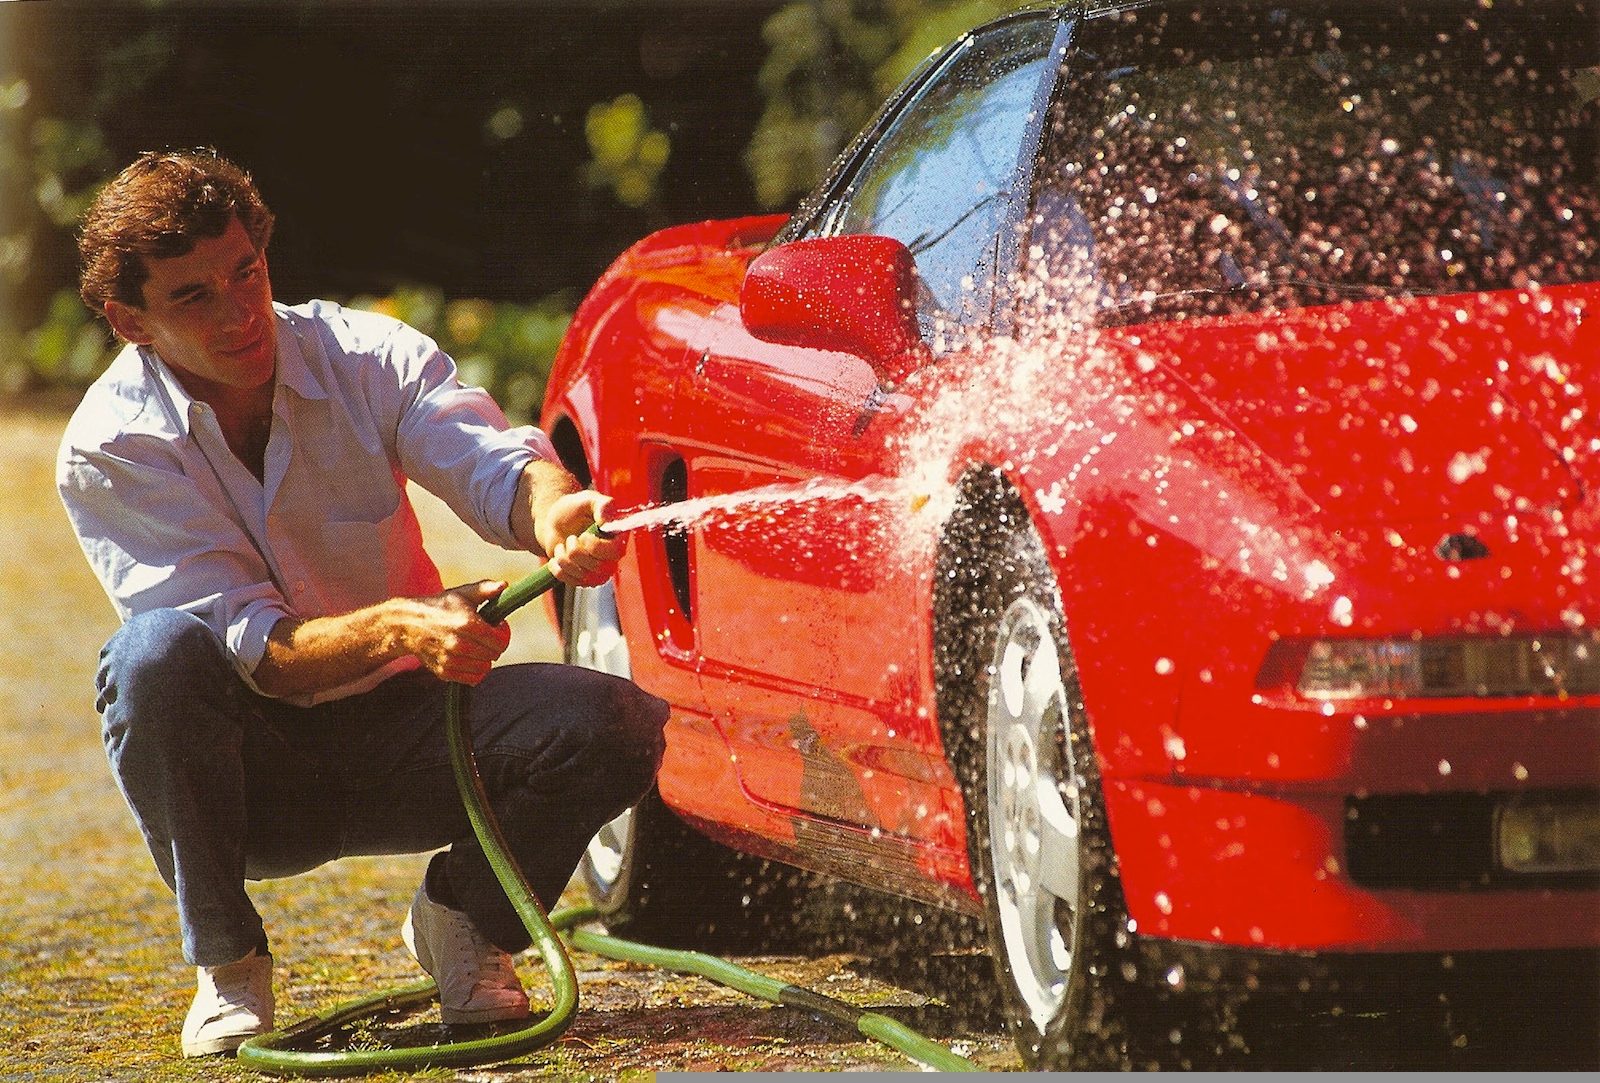 The original owner washing his pride and joy.